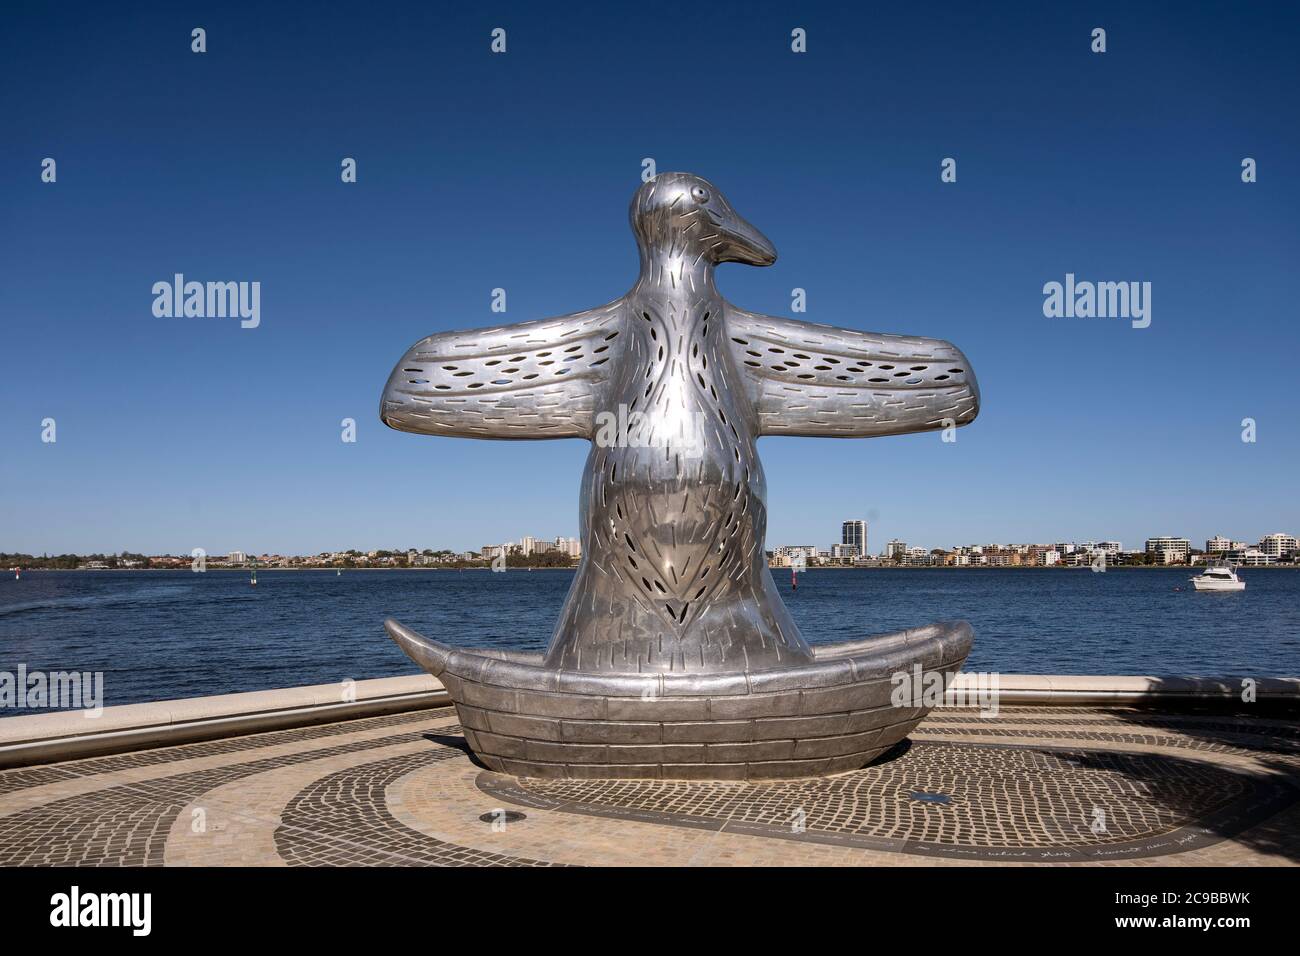 Perth, Western Australia - Jun, 2020: First contact sculpture. The artwork depicts the arrival of European settlers to Perth. By Laurel Nannup, 2015. Stock Photo